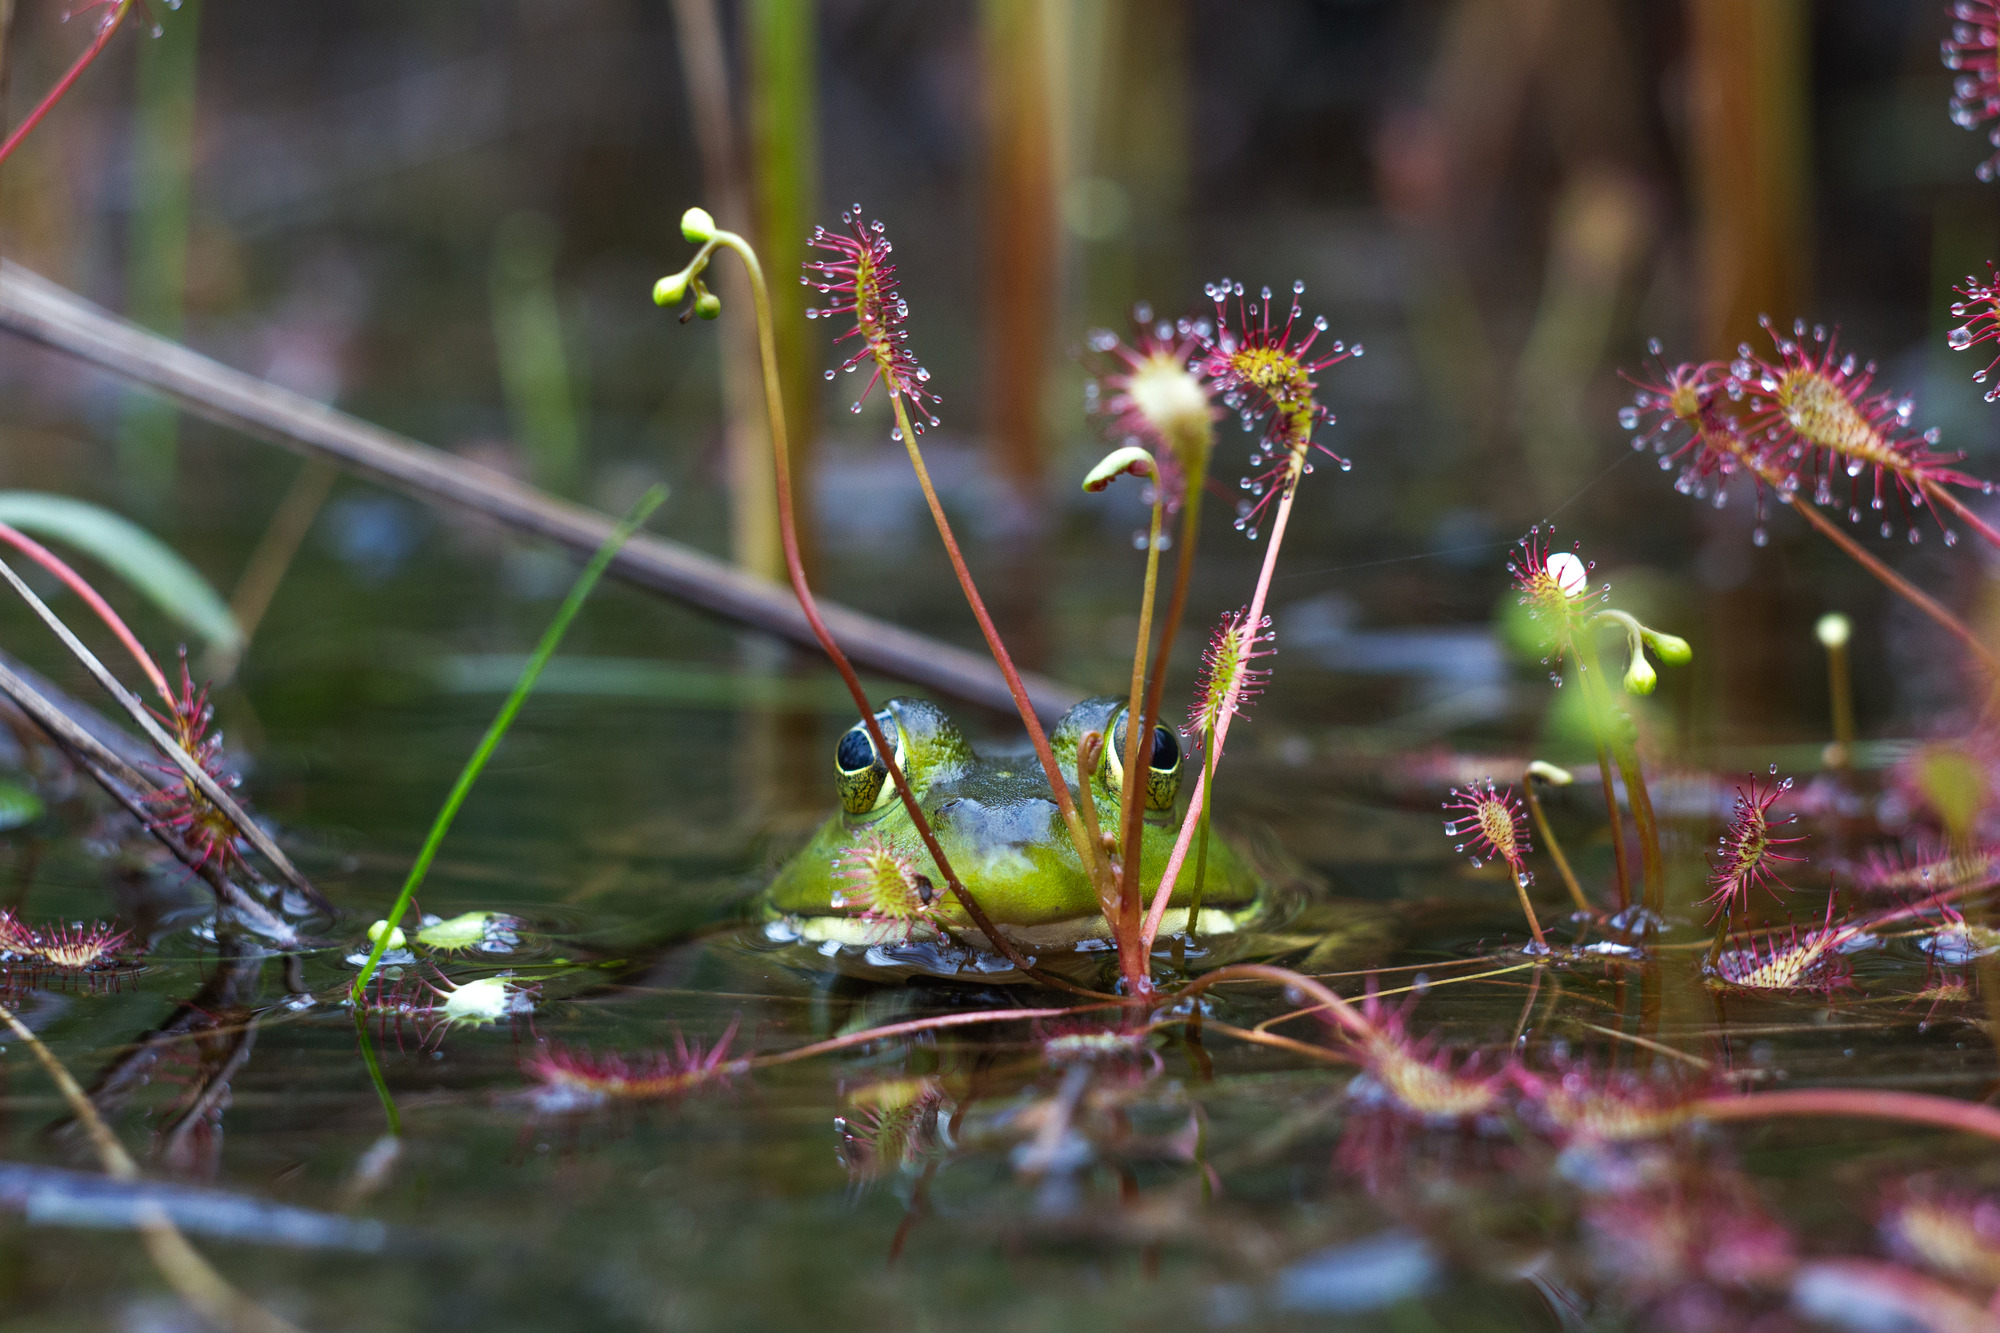 Tiny green plants with red spikes coming out of the oval shaped top. There are raindrops on the ends of the spikes and the plants are sitting in pond water. A frog sits in the water behind the plants.